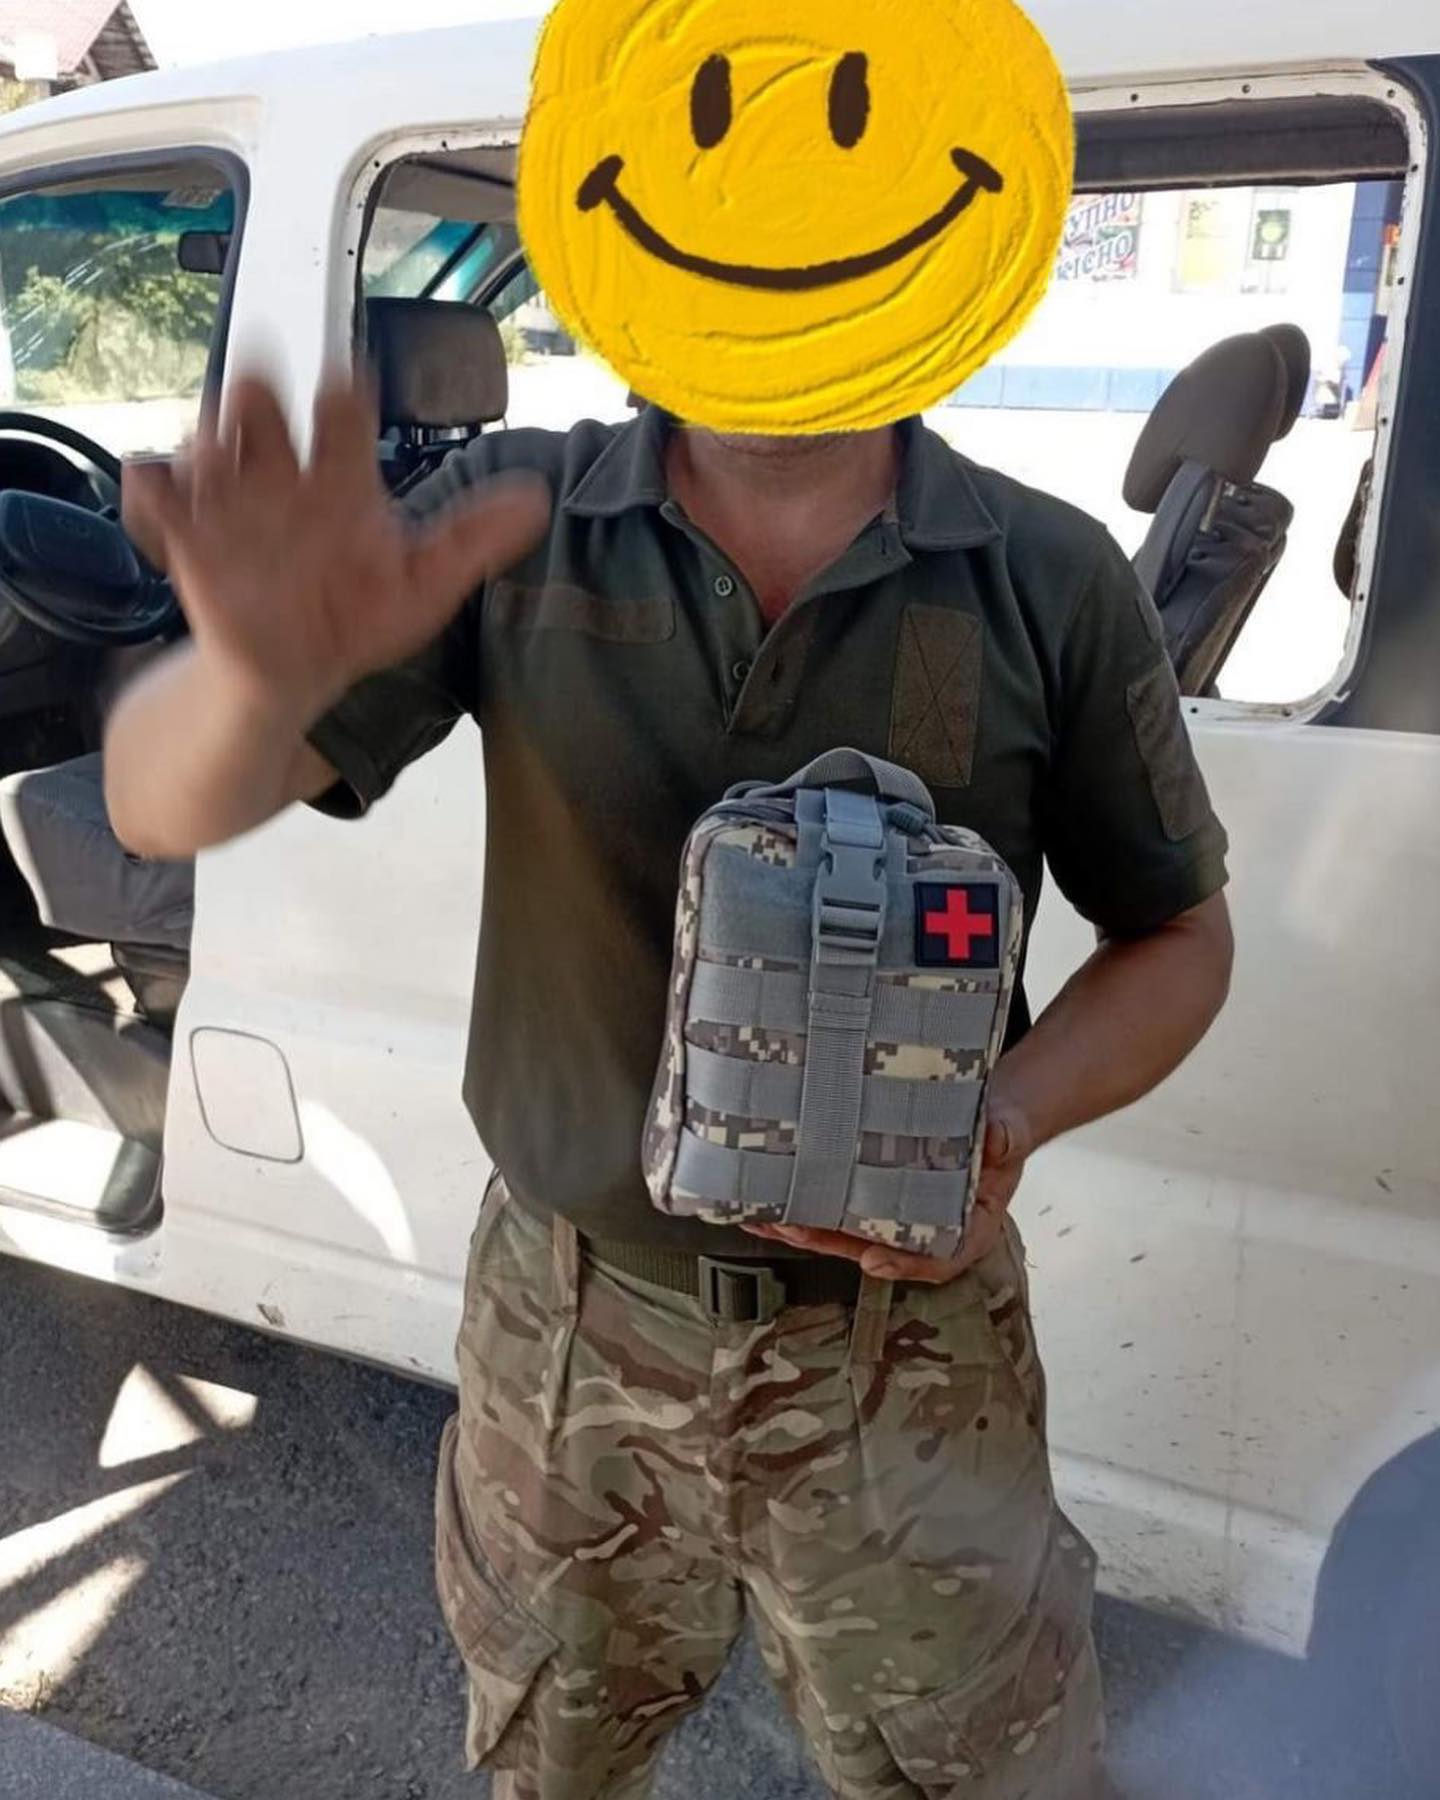 A soldier with a smiley face in front of a van.